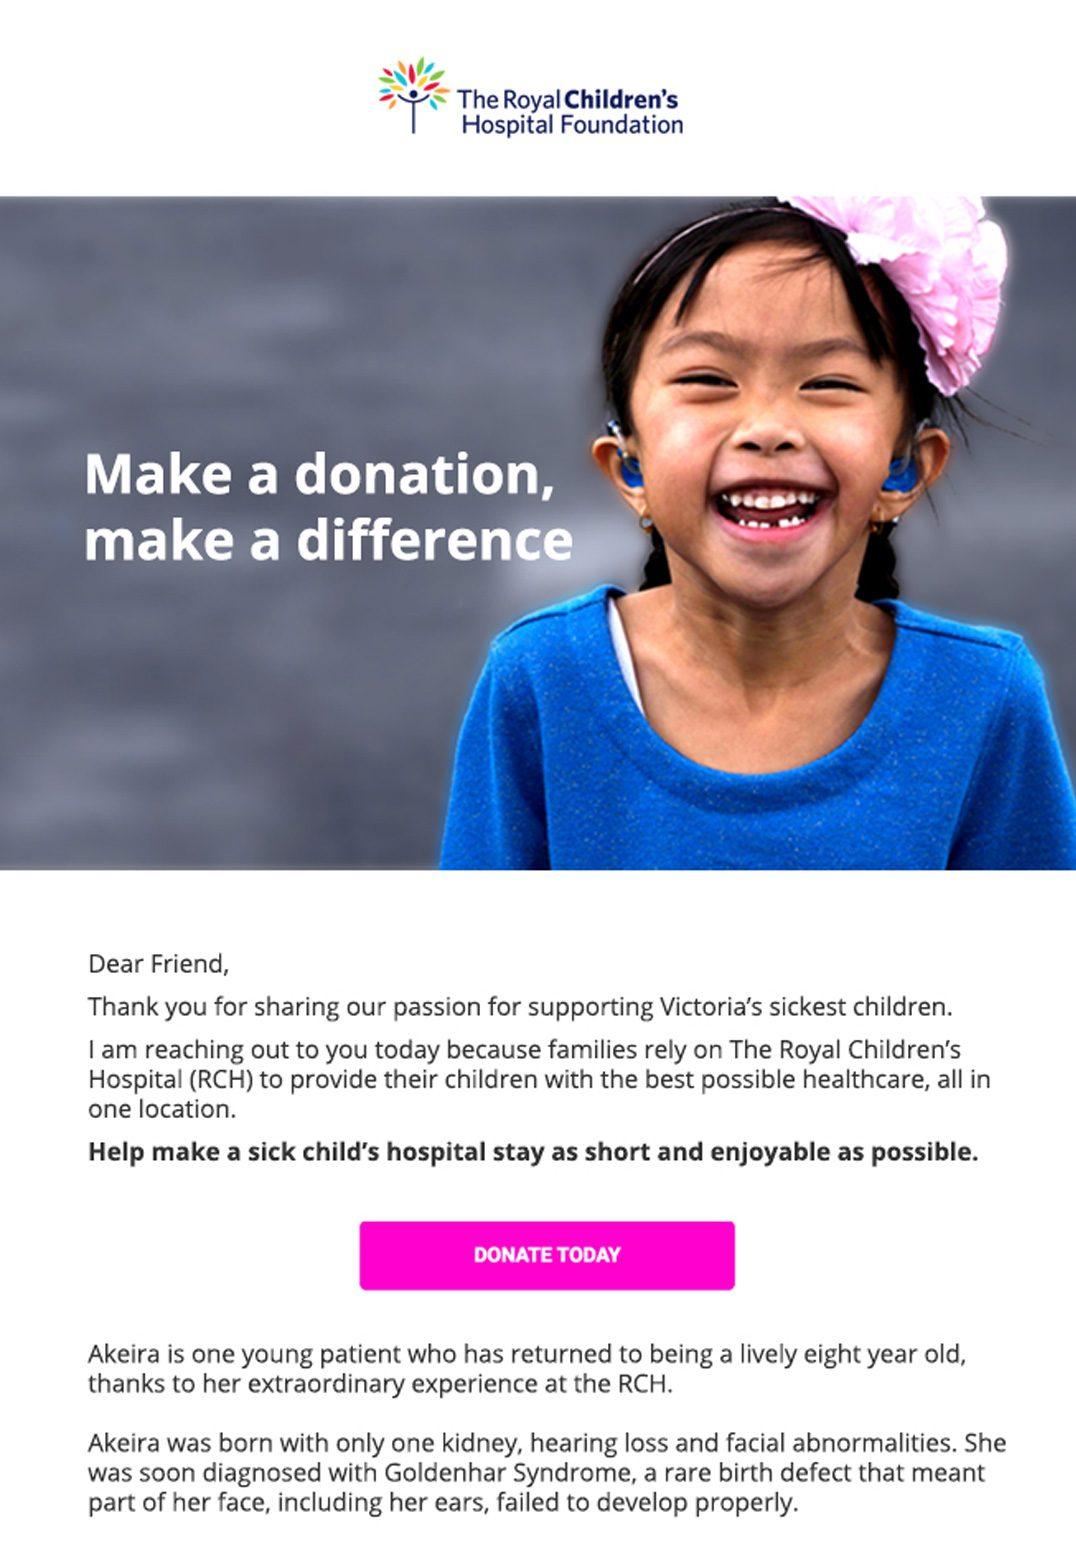 One of the best donation message examples in this regard is this one from The Royal Children’s Hospital Foundation